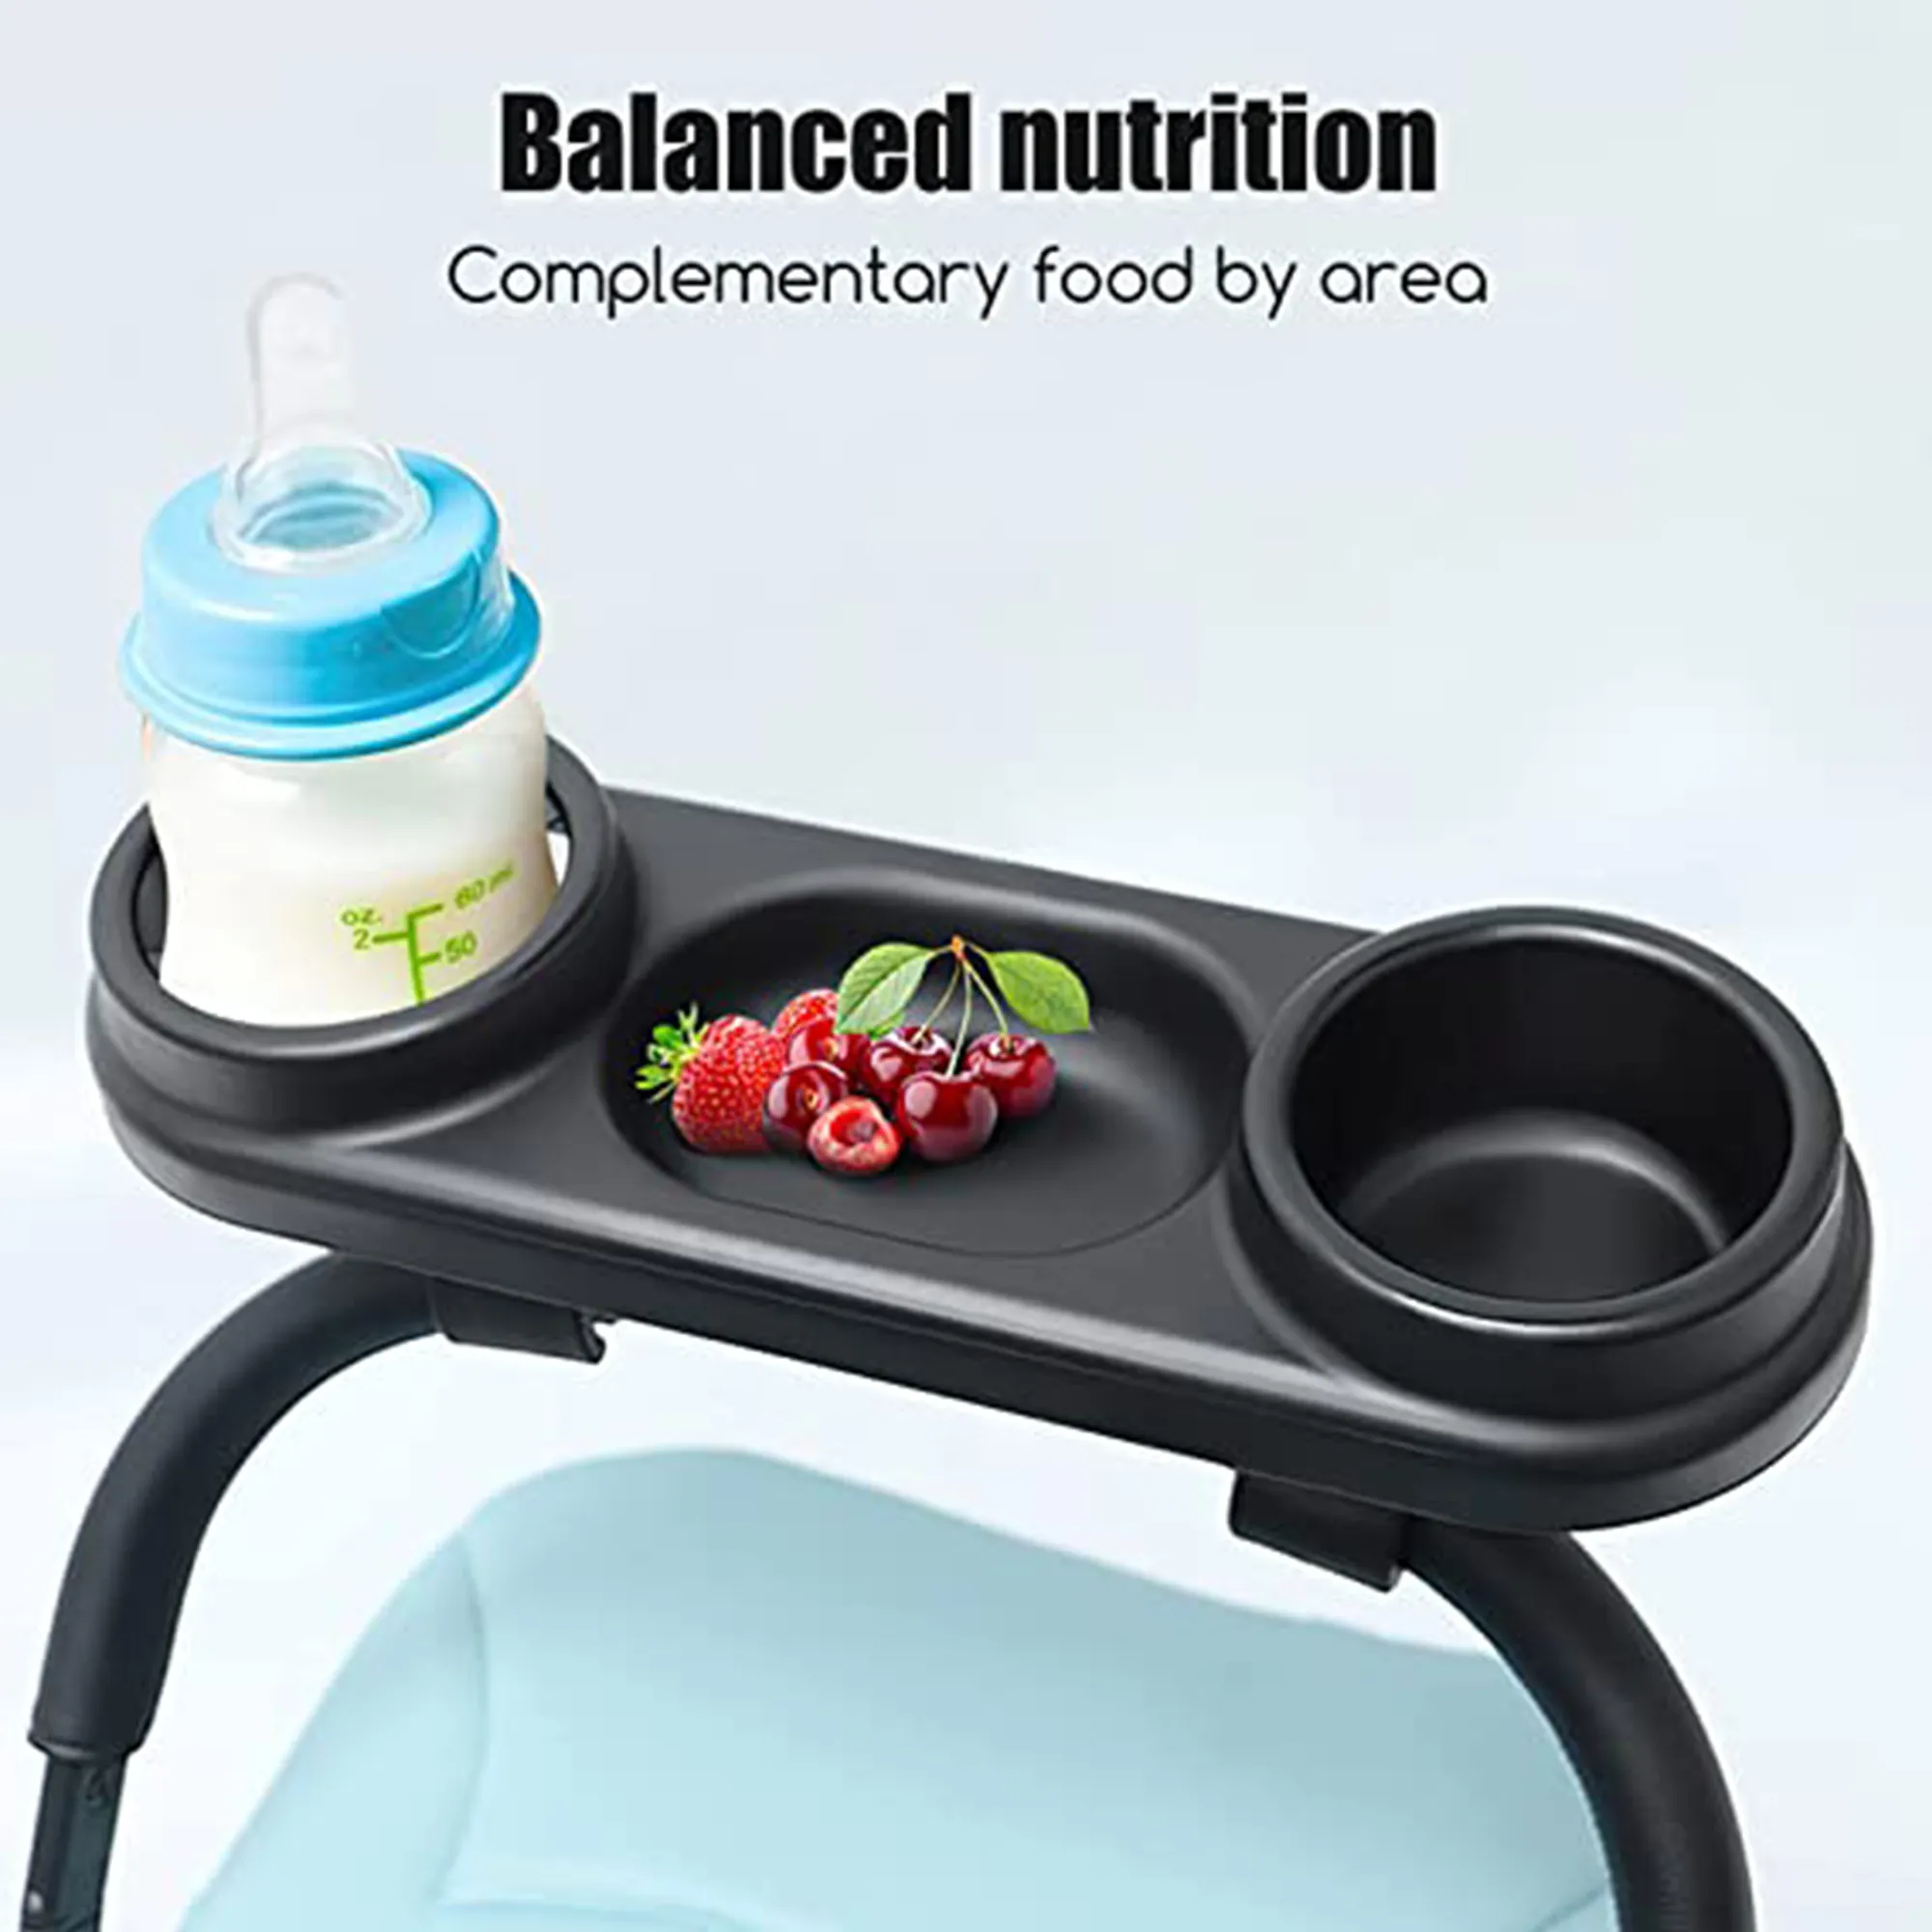 Universal Stroller Snack Tray with 2 Cup Holders Stroller Snack Catcher and Drinks Holder Stroller A